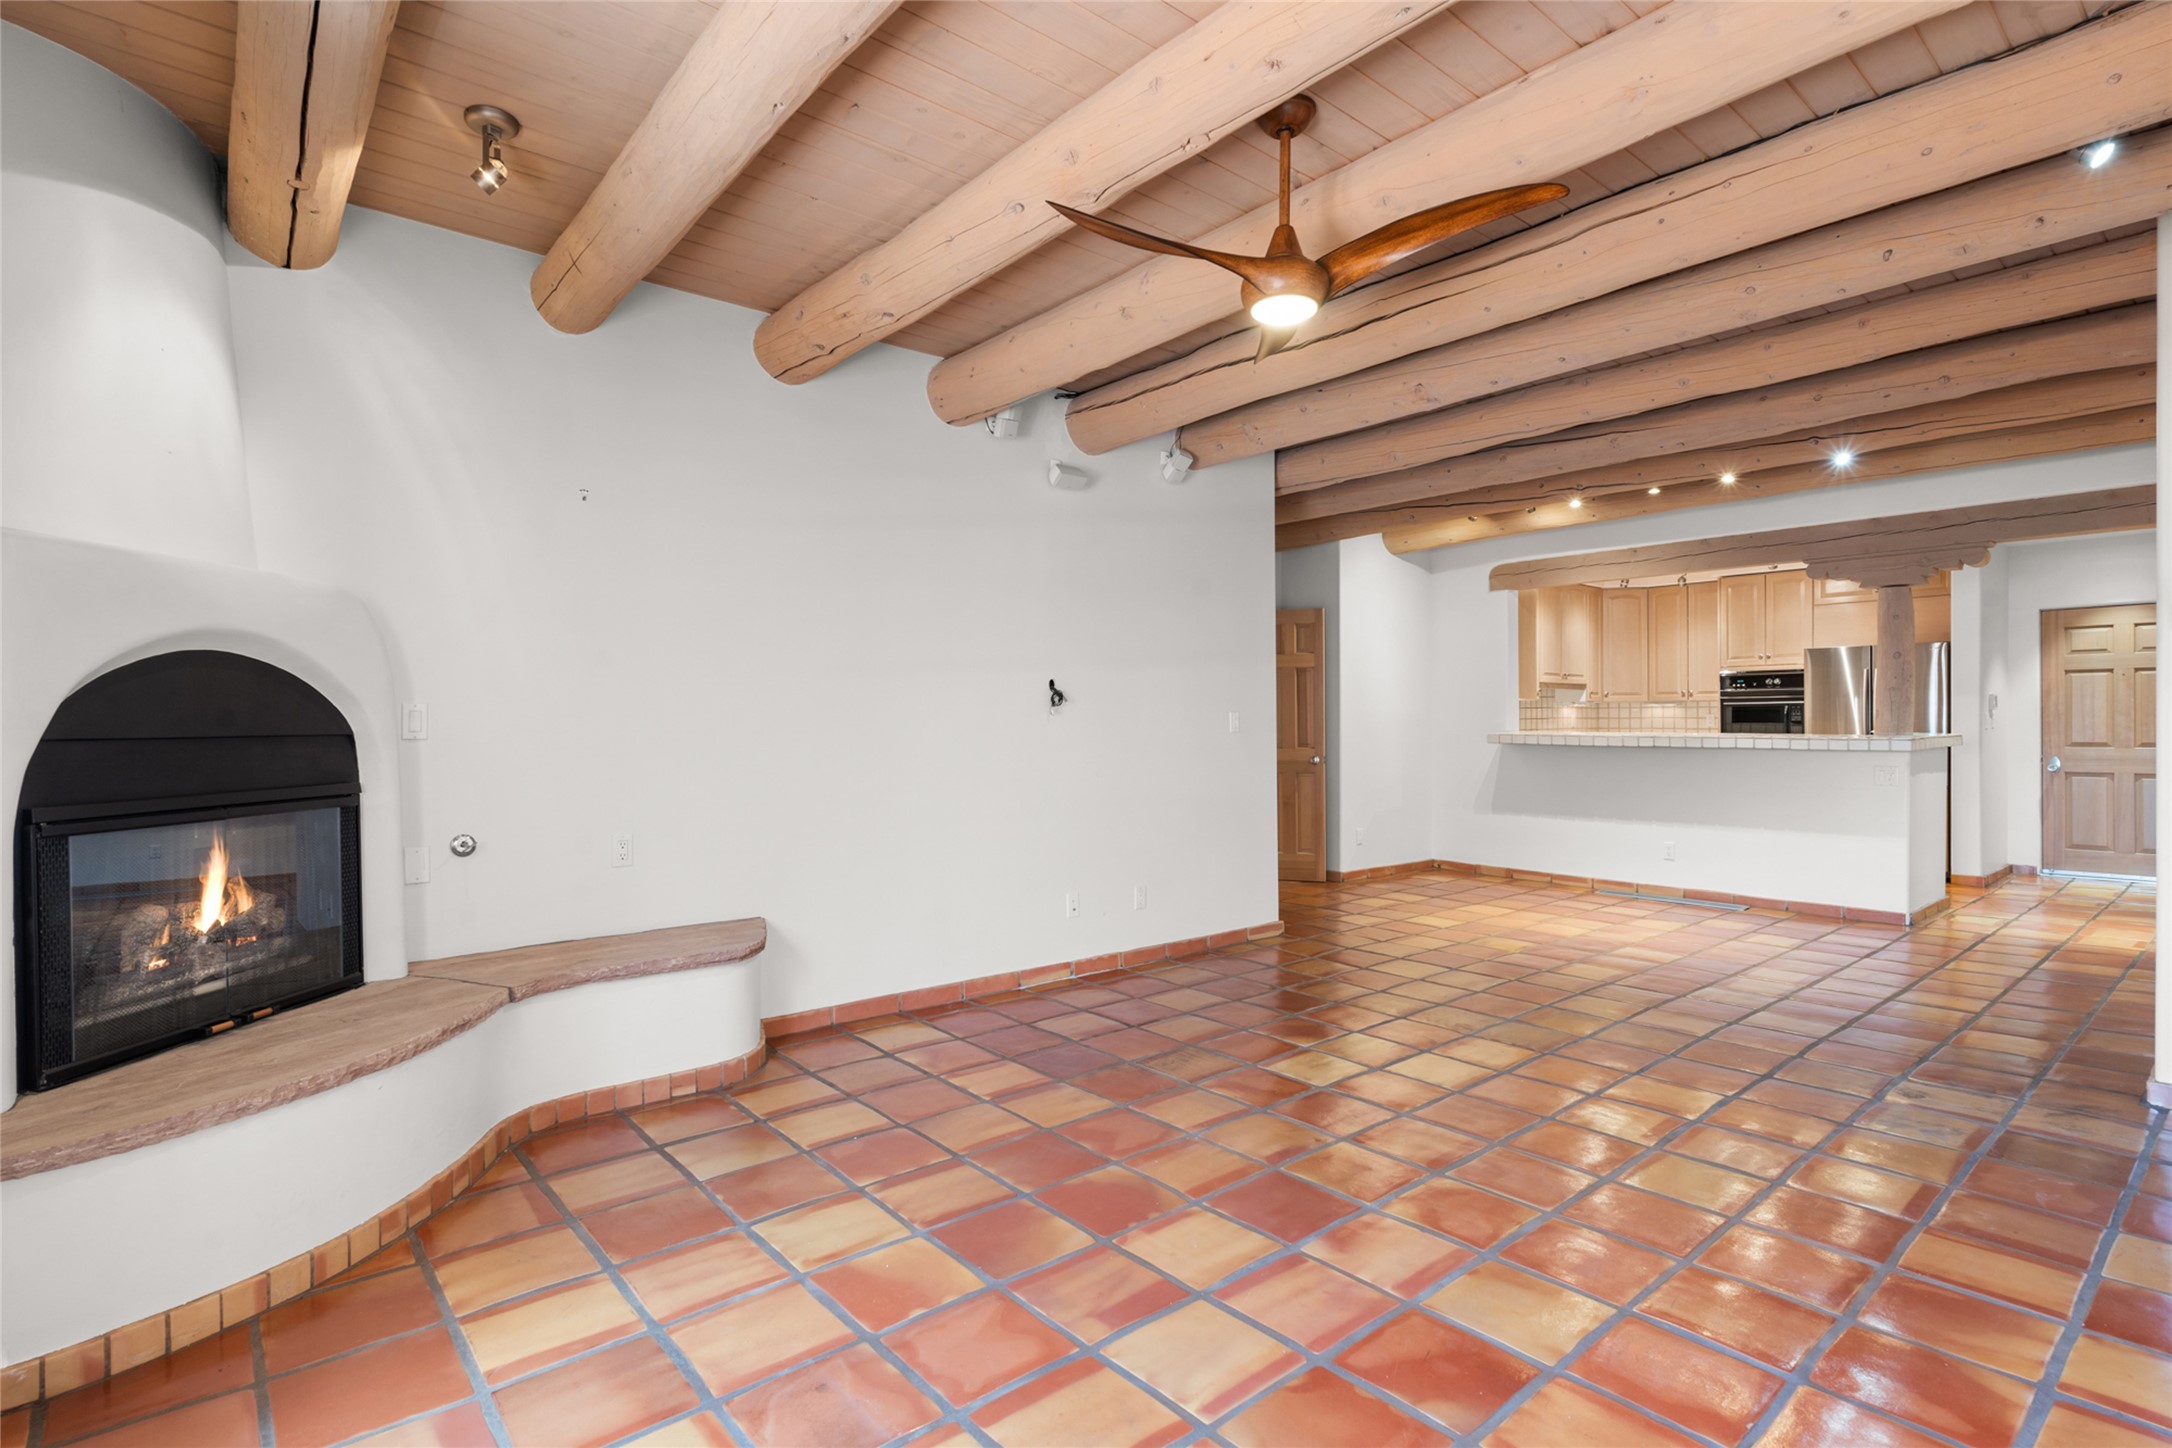 3101 Old Pecos Trail 154, Santa Fe, New Mexico 87505, 2 Bedrooms Bedrooms, ,2 BathroomsBathrooms,Residential,For Sale,3101 Old Pecos Trail 154,202401296